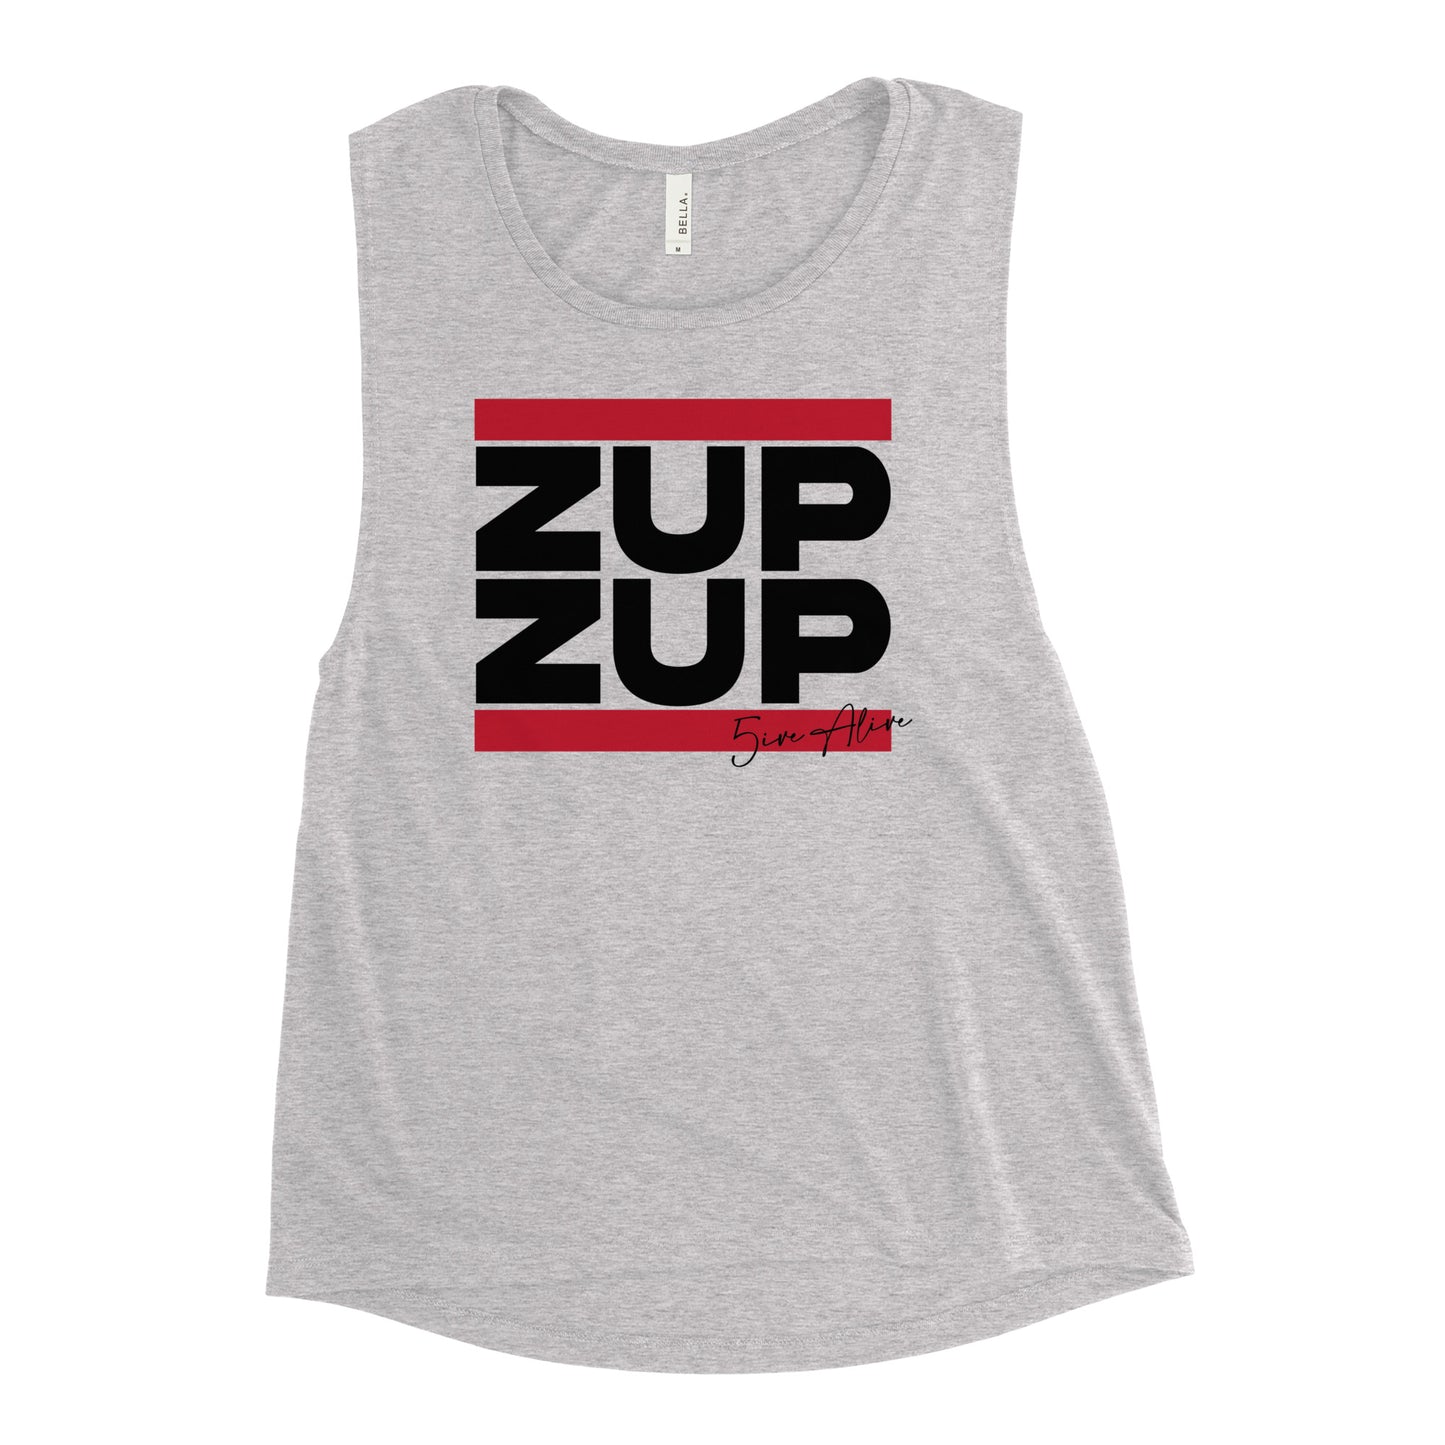 Zup Zup (Black Text) Ladies’ Muscle Tank